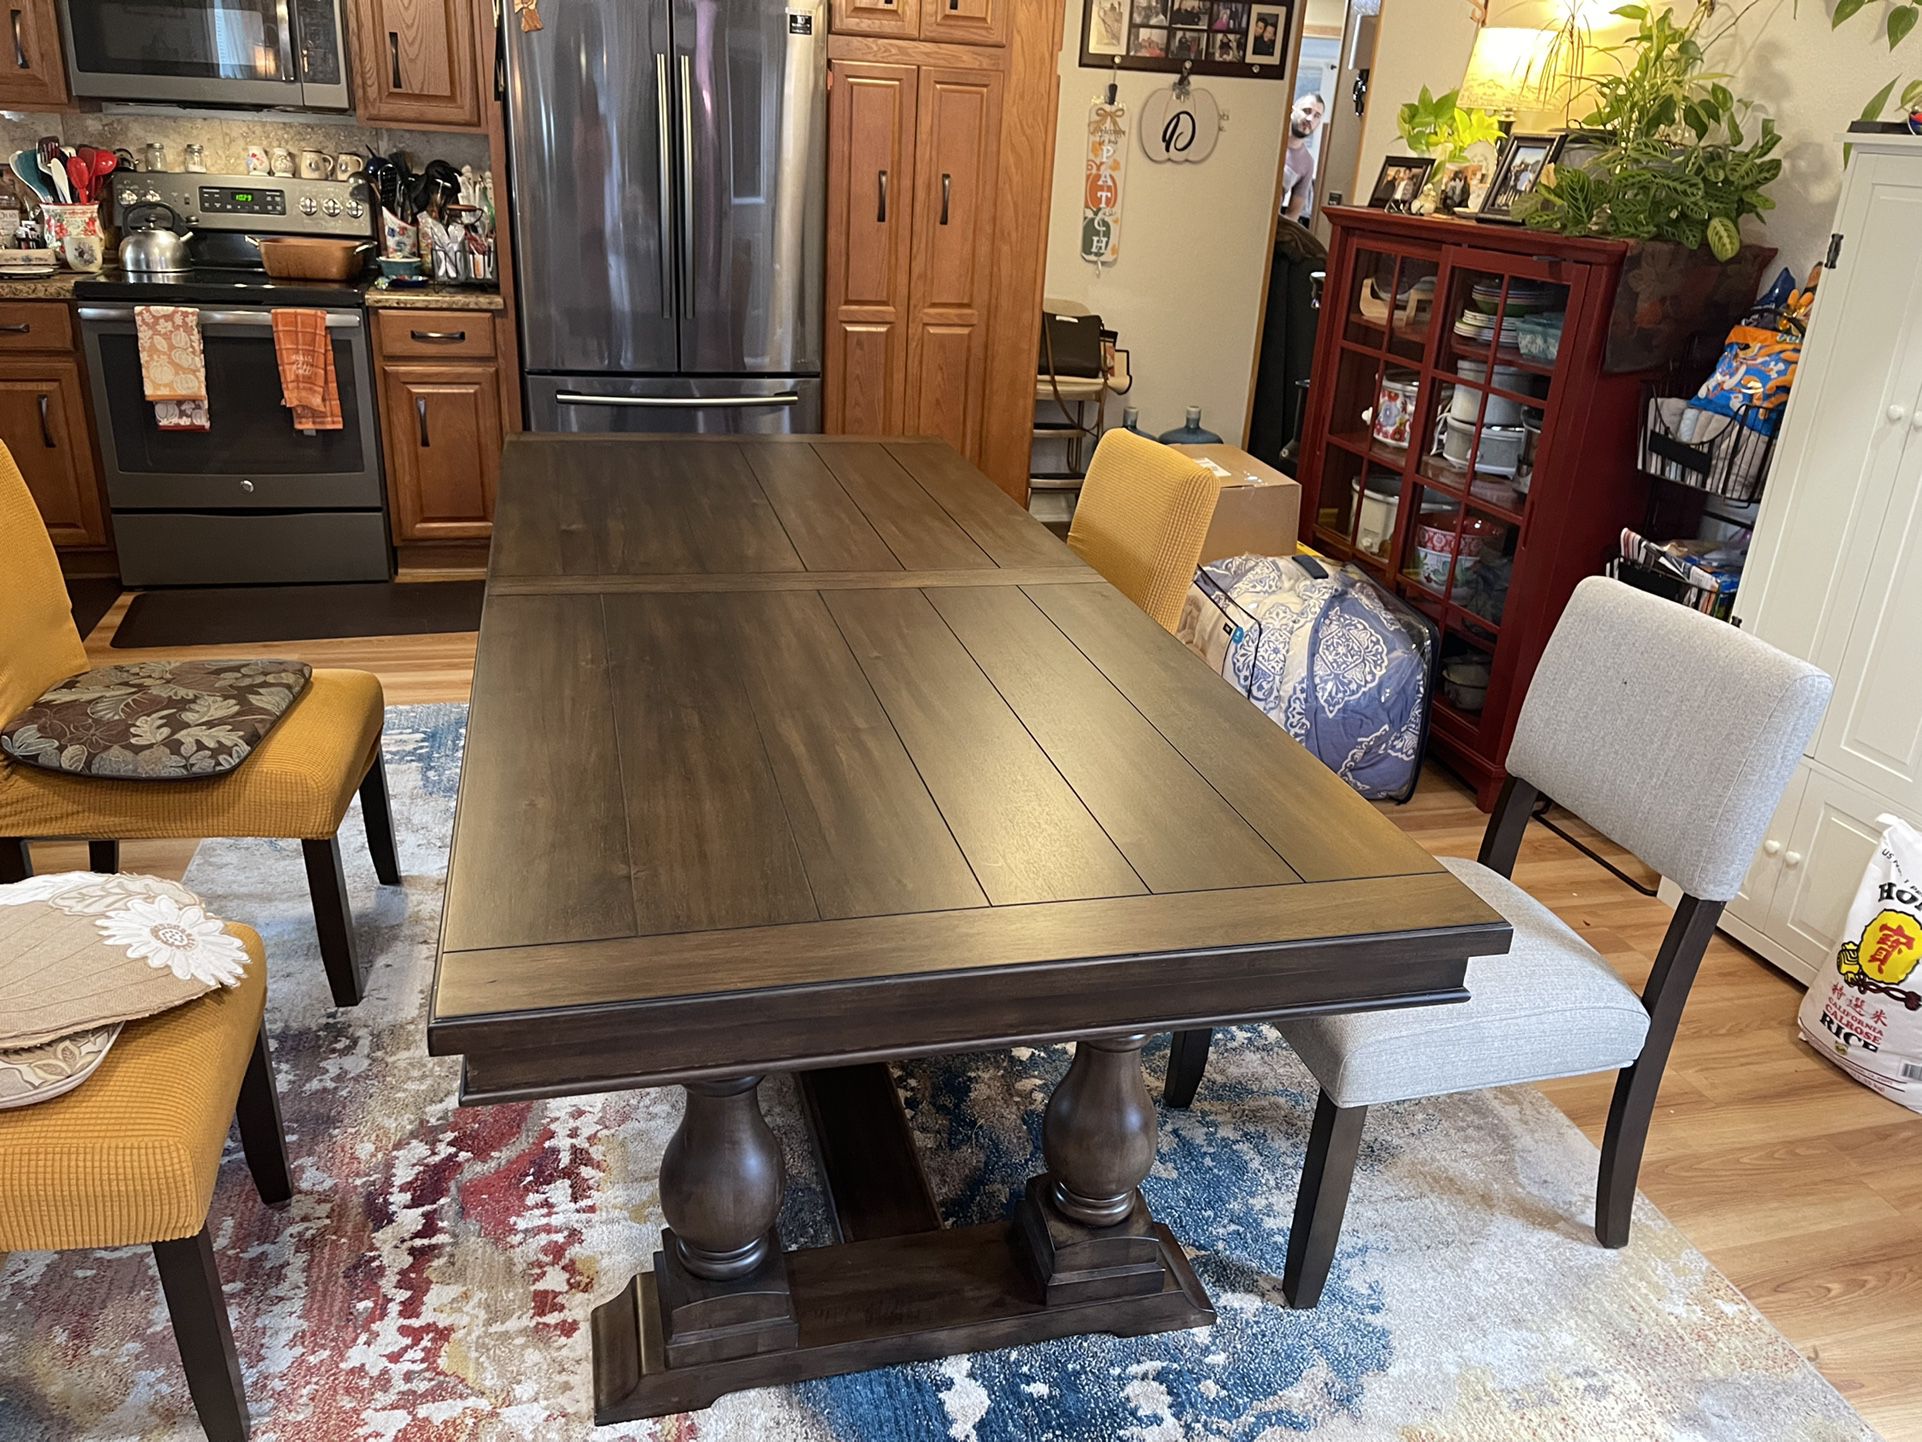 Dining Table 4 Chairs